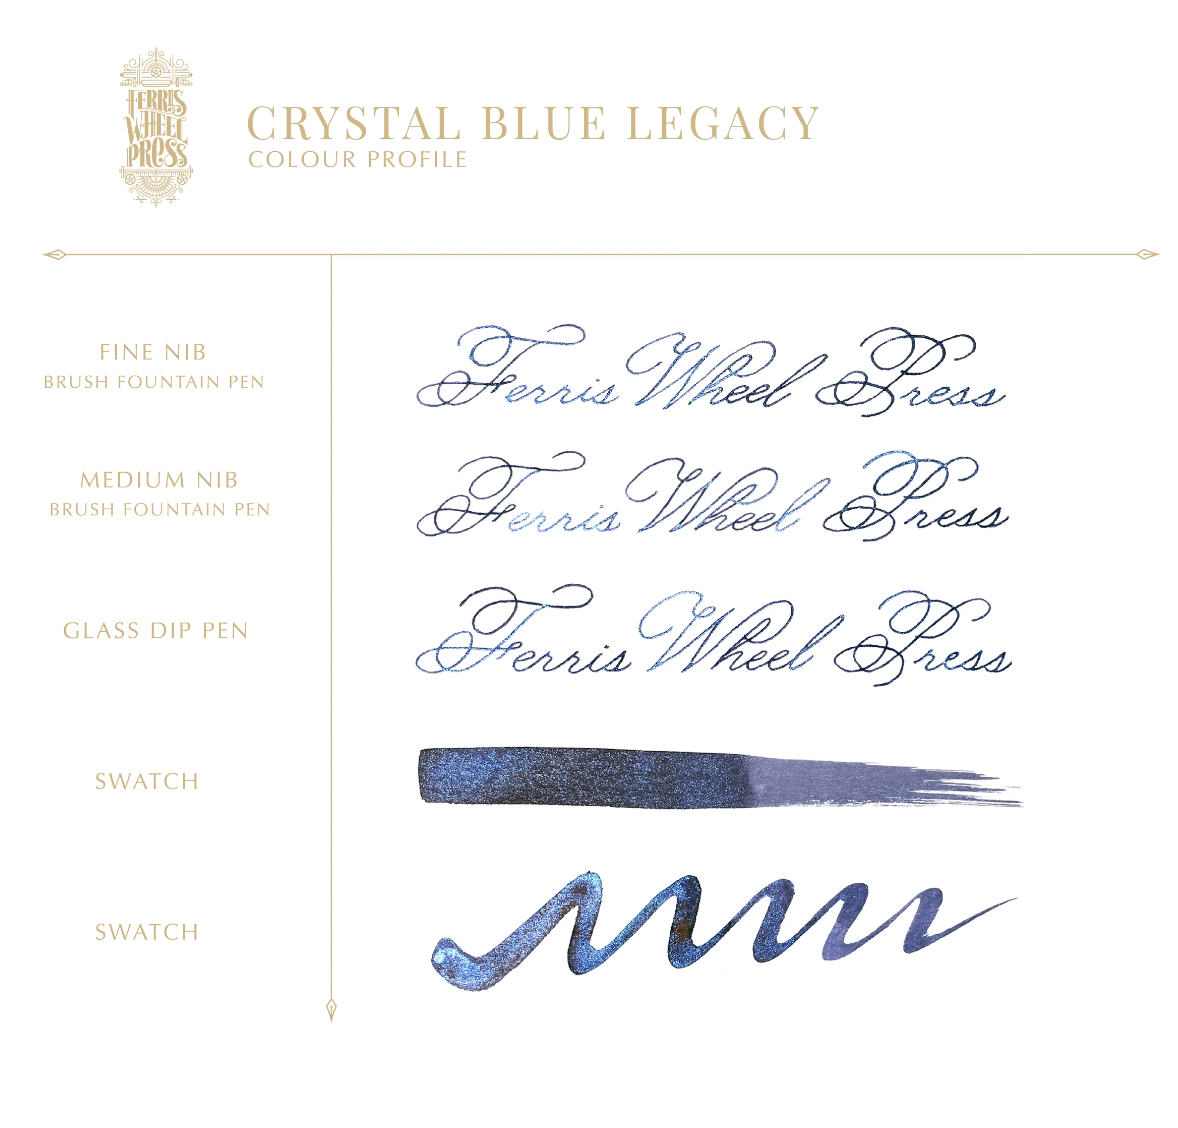 Ferris Wheel Press Crystal Blue Legacy Calligraphy Ink. Available for sale in Singapore at Drawing Etc. Art Supplies.